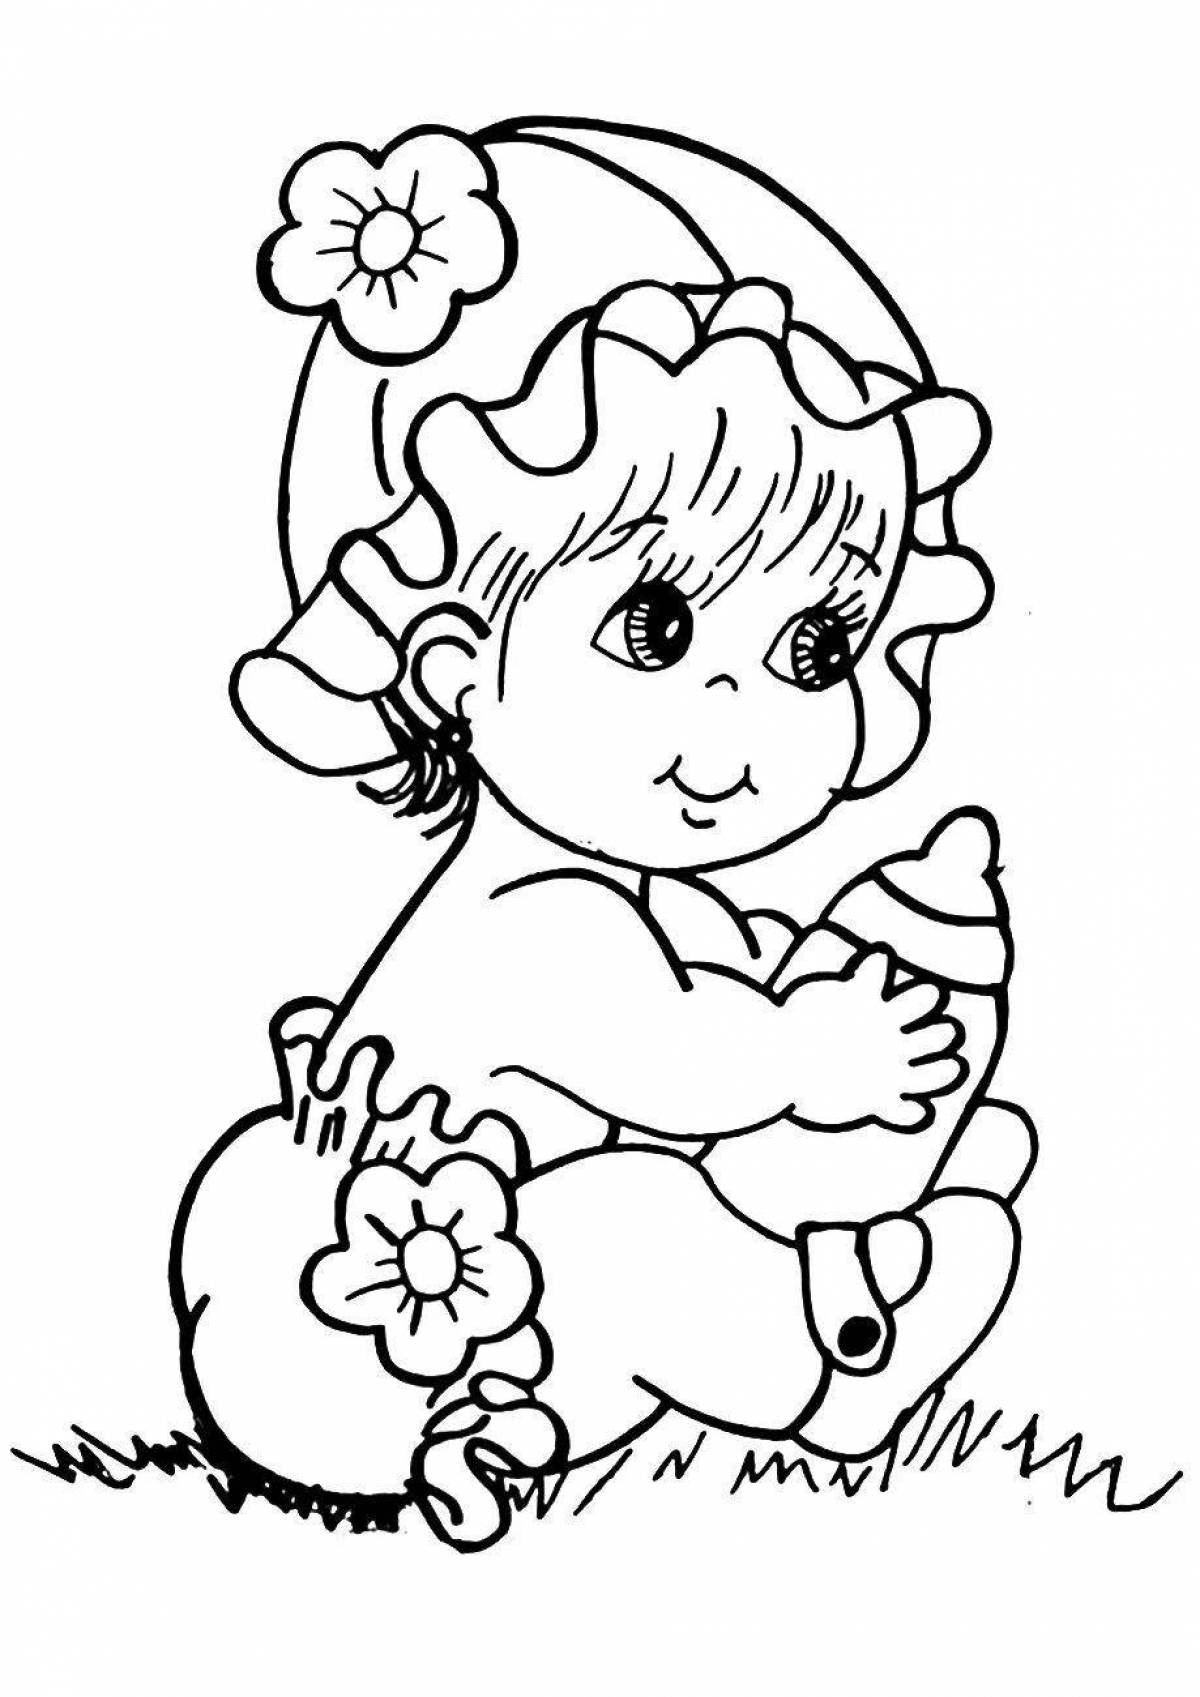 Playful peanut coloring page